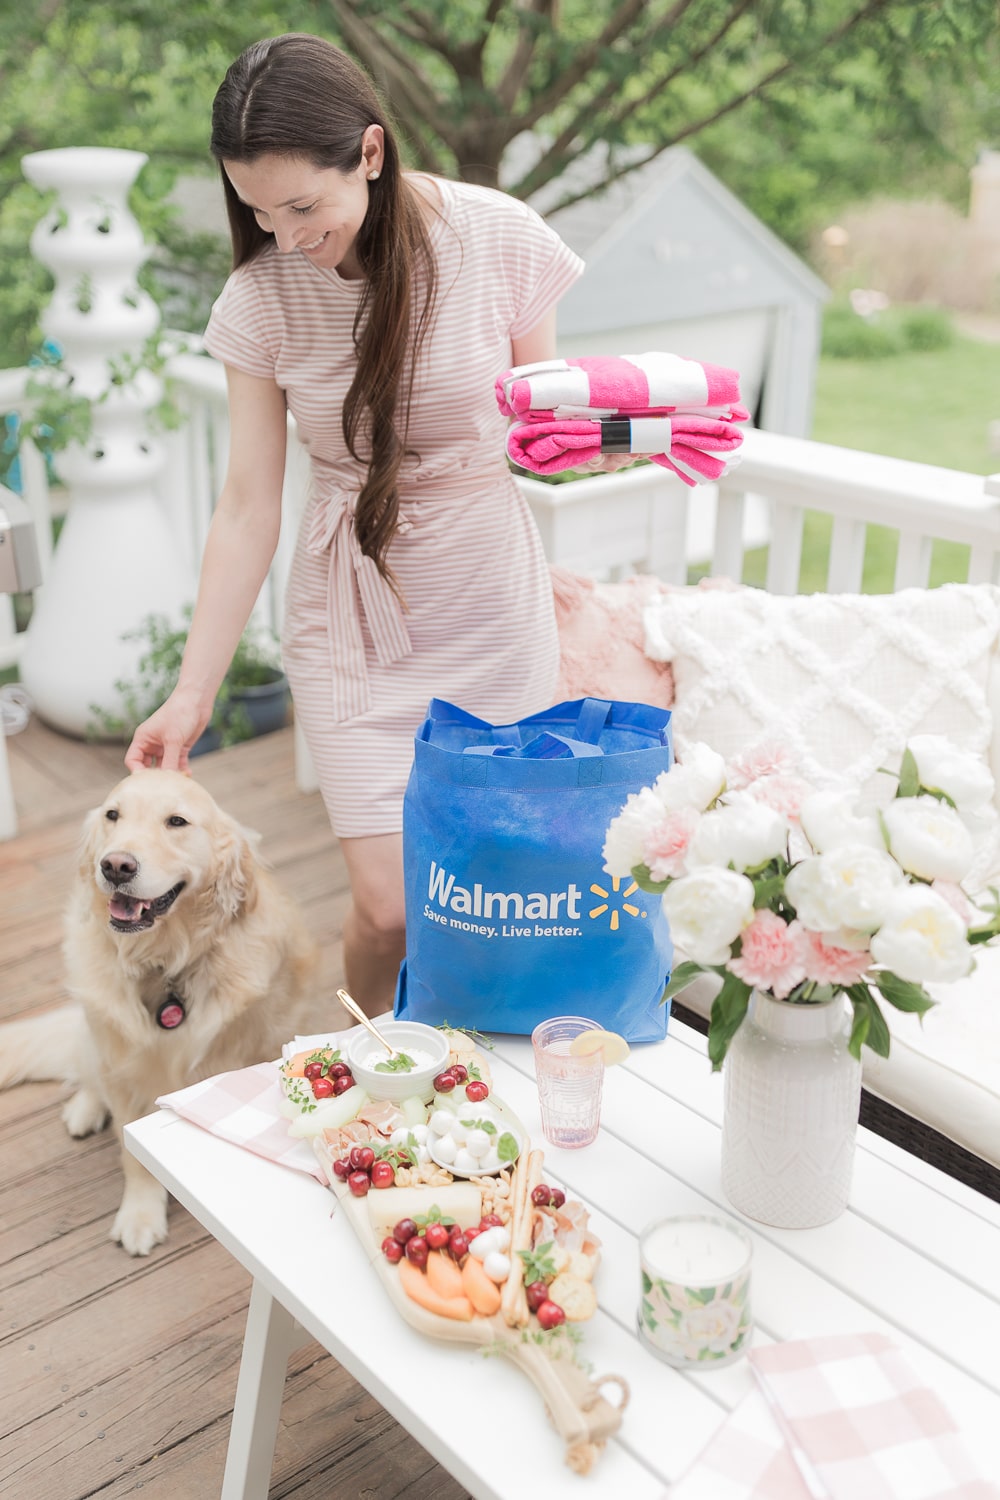 Top Walmart summer entertaining essentials from blogger Stephanie Ziajka on Diary of a Debutante